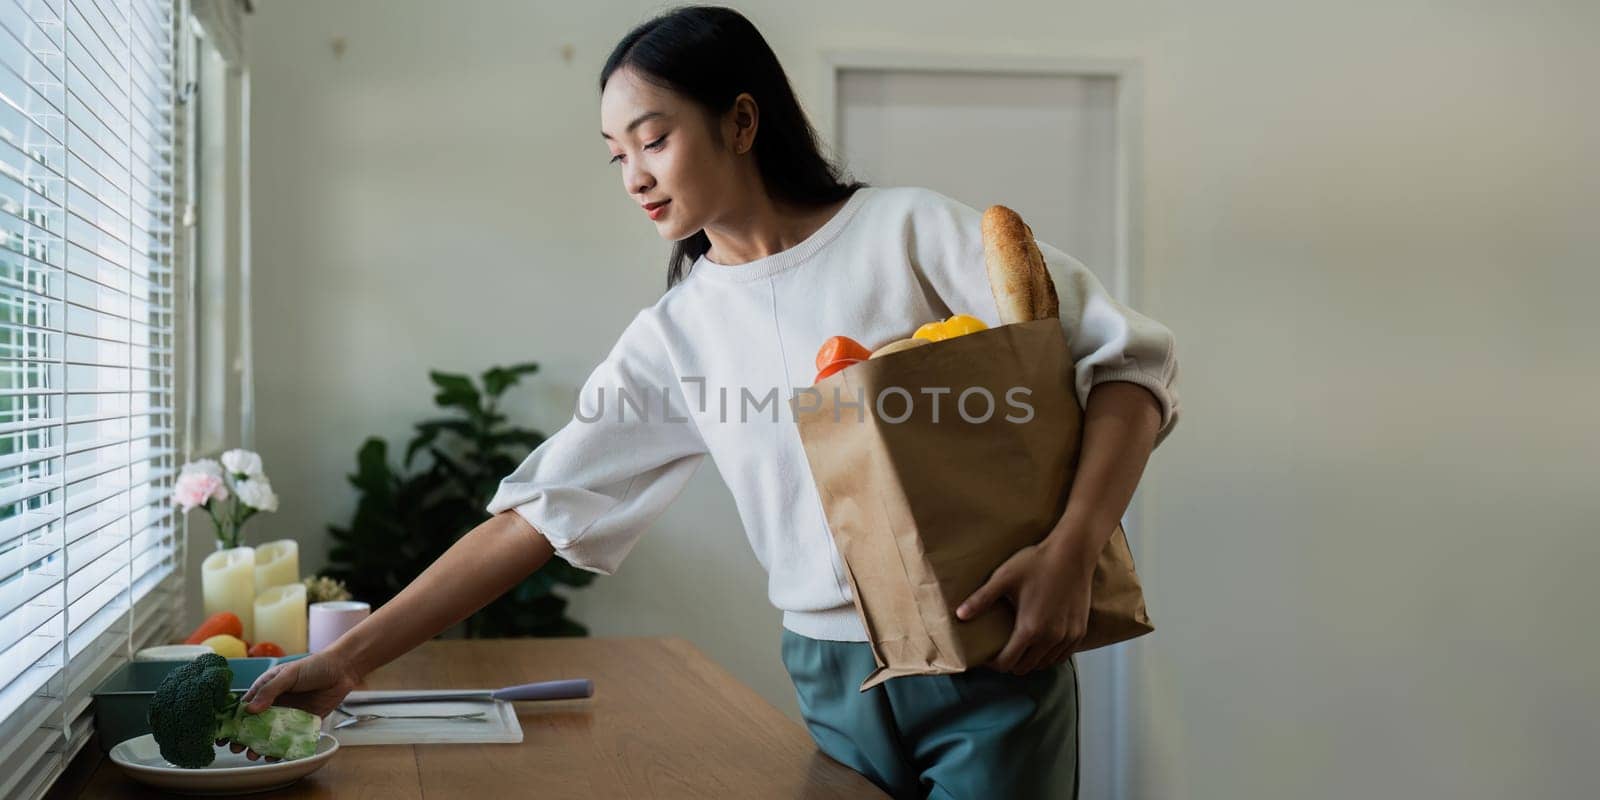 Organic Food Delivery. Happy young woman unpacking bag with Fresh Vegetables in kitchen by itchaznong